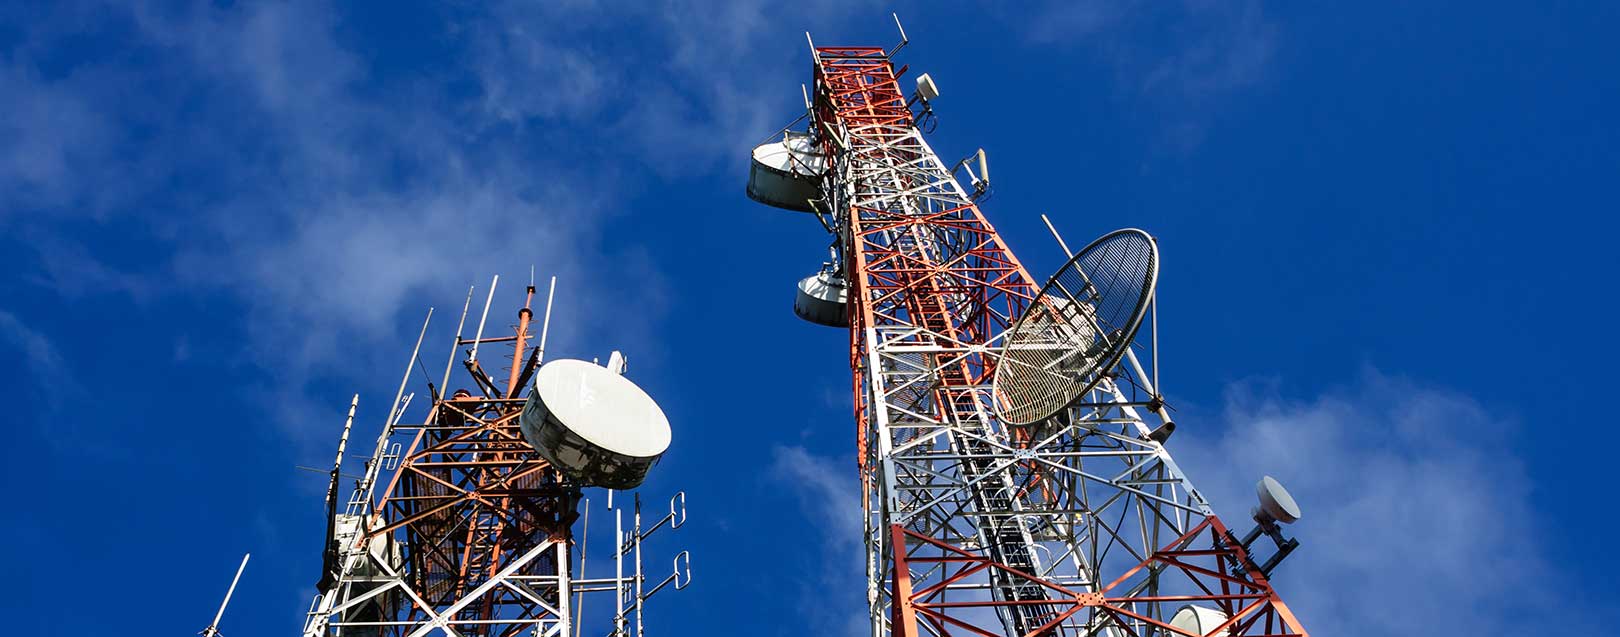 Airtel to divest 950 telecom towers in Congo